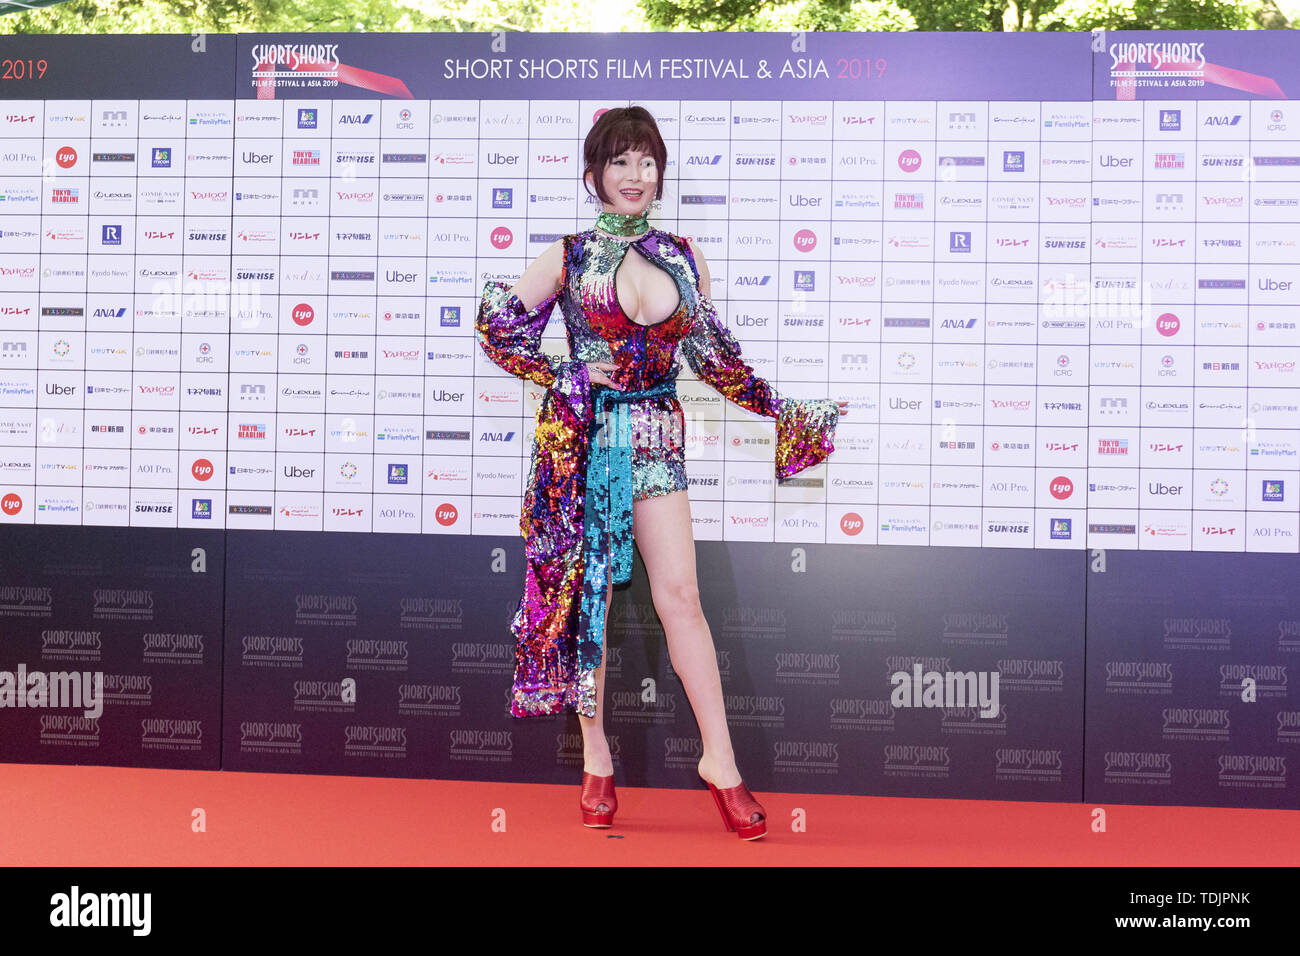 June 16, 2019 - Tokyo, Japan - Japanese celebrity Mika Kano poses for the  cameras on the red carpet during the Short Shorts Film Festival & Asia 2019  (SSFF & Asia) Award